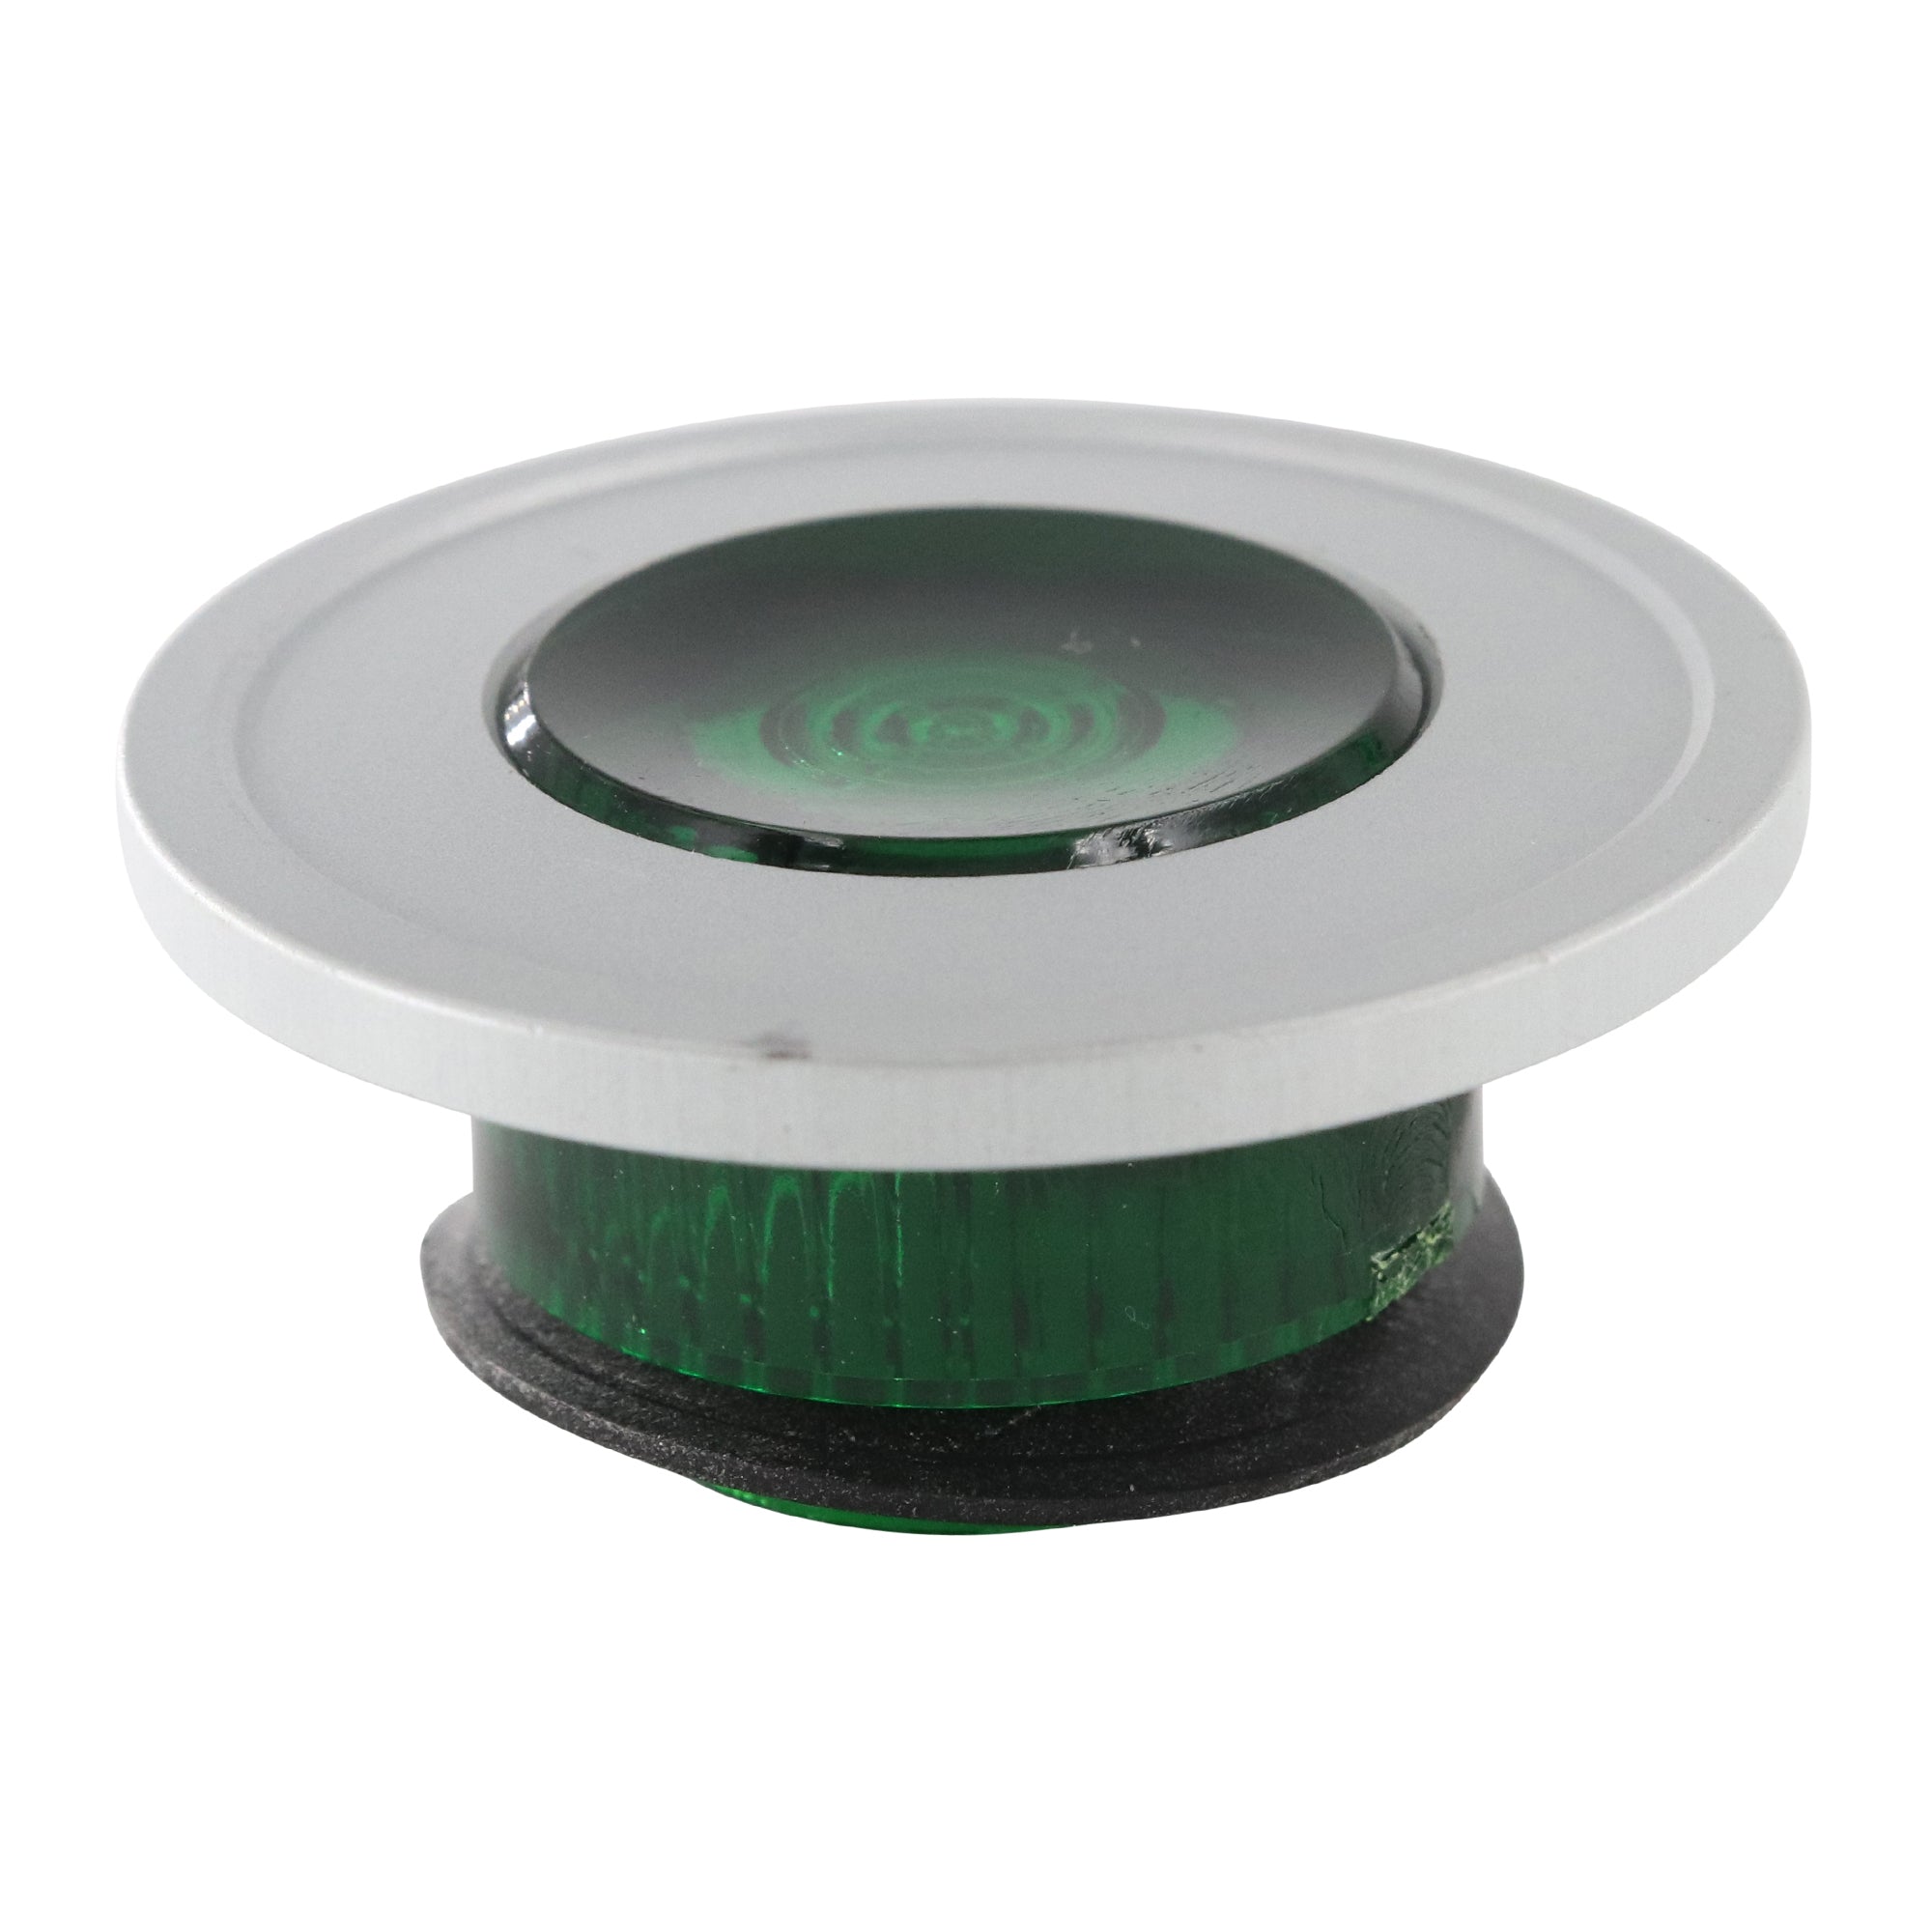 EATON, EATON 10250TC58 PLASTIC LENS FOR 10250T PUSH-PULL BUTTON, SIDE LIGHTED, GREEN